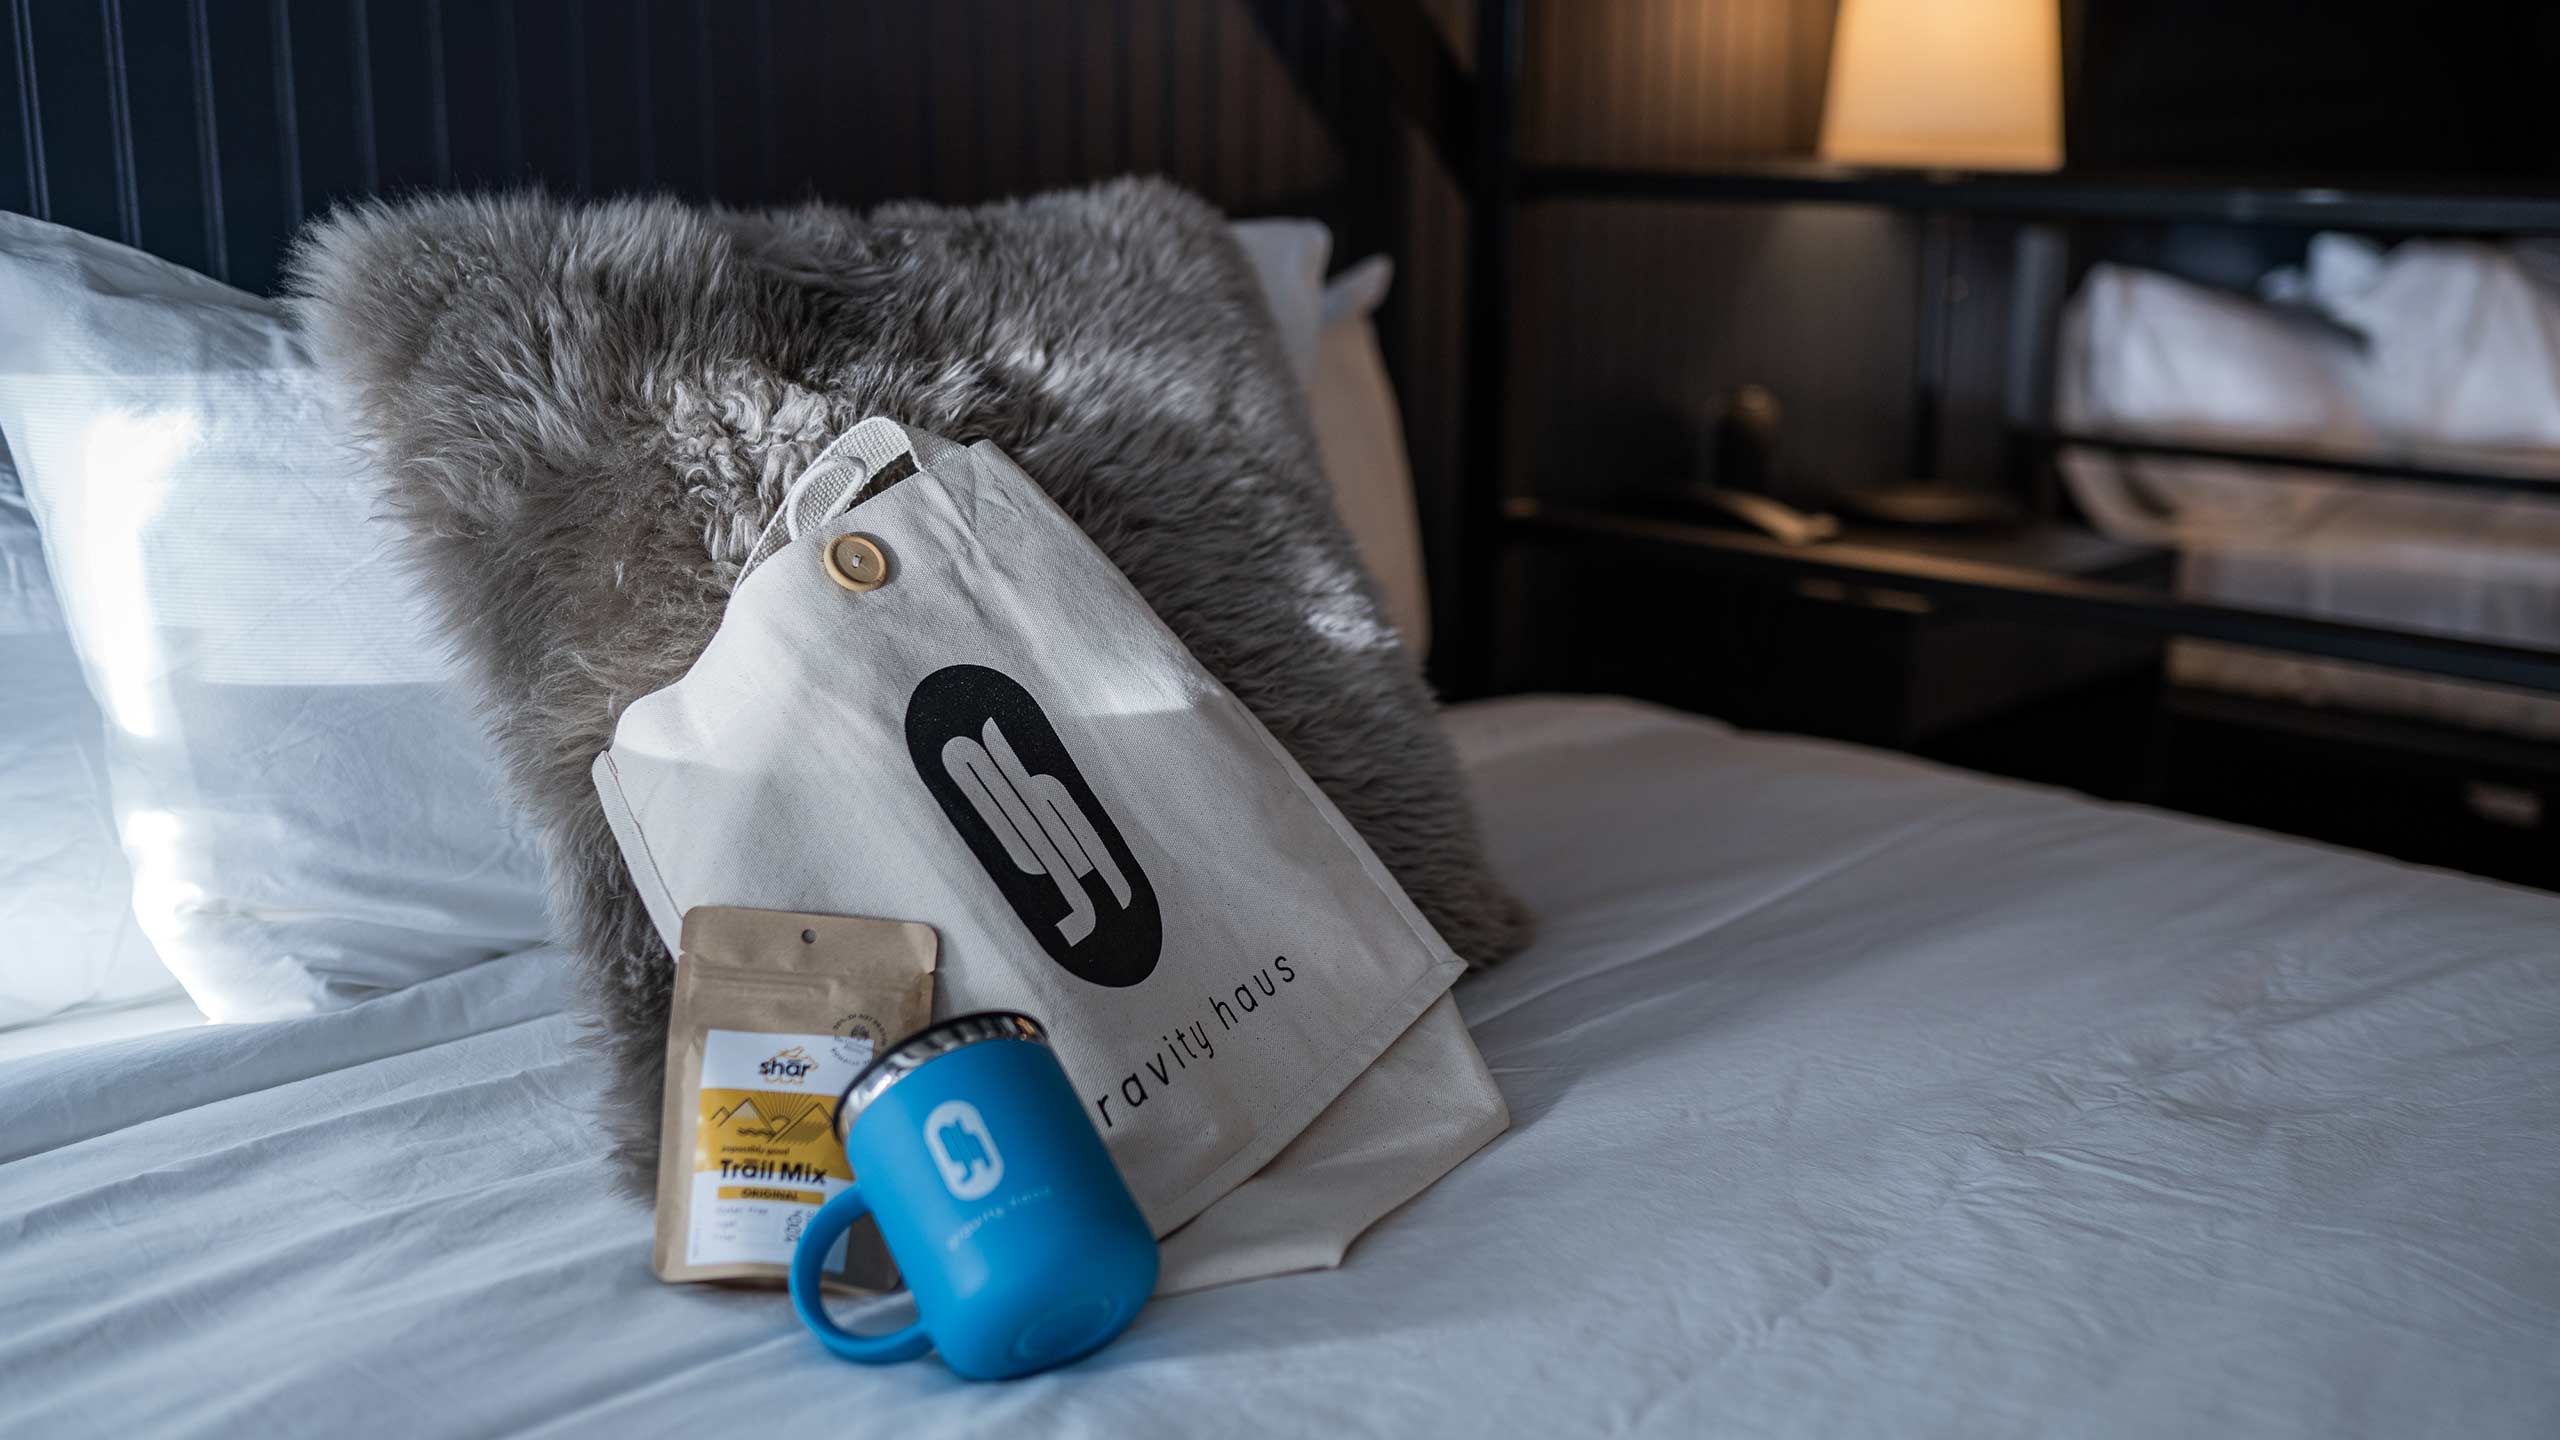 Gravity Haus Winter Park Idlewild King Bed Detail with branded mugs and bag